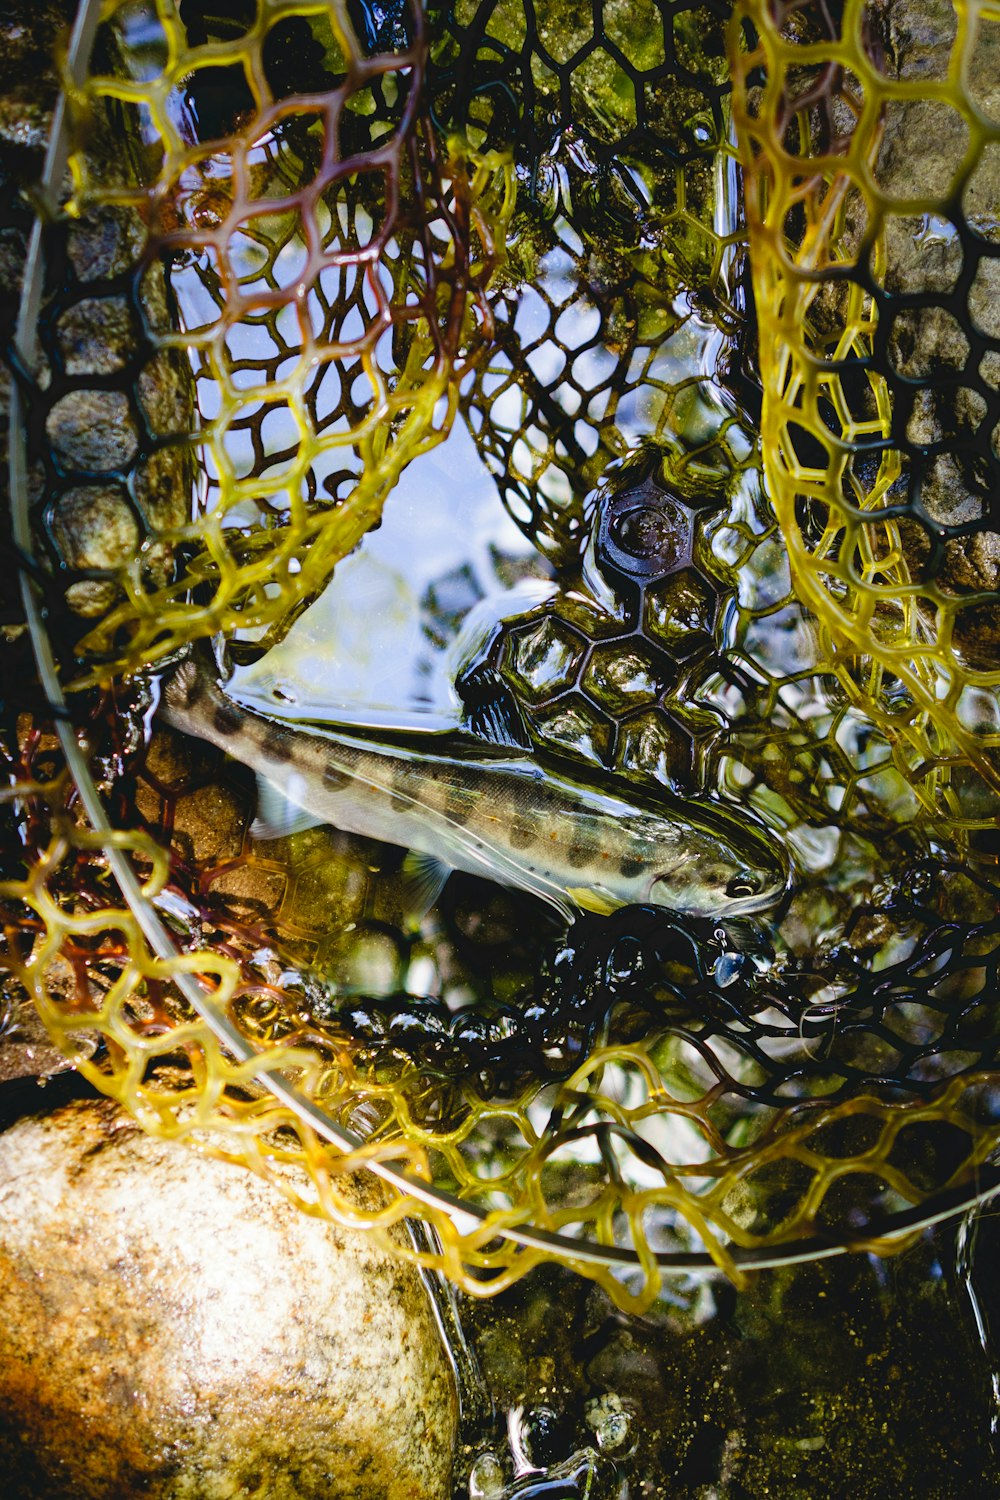 a close up of a fish in a net